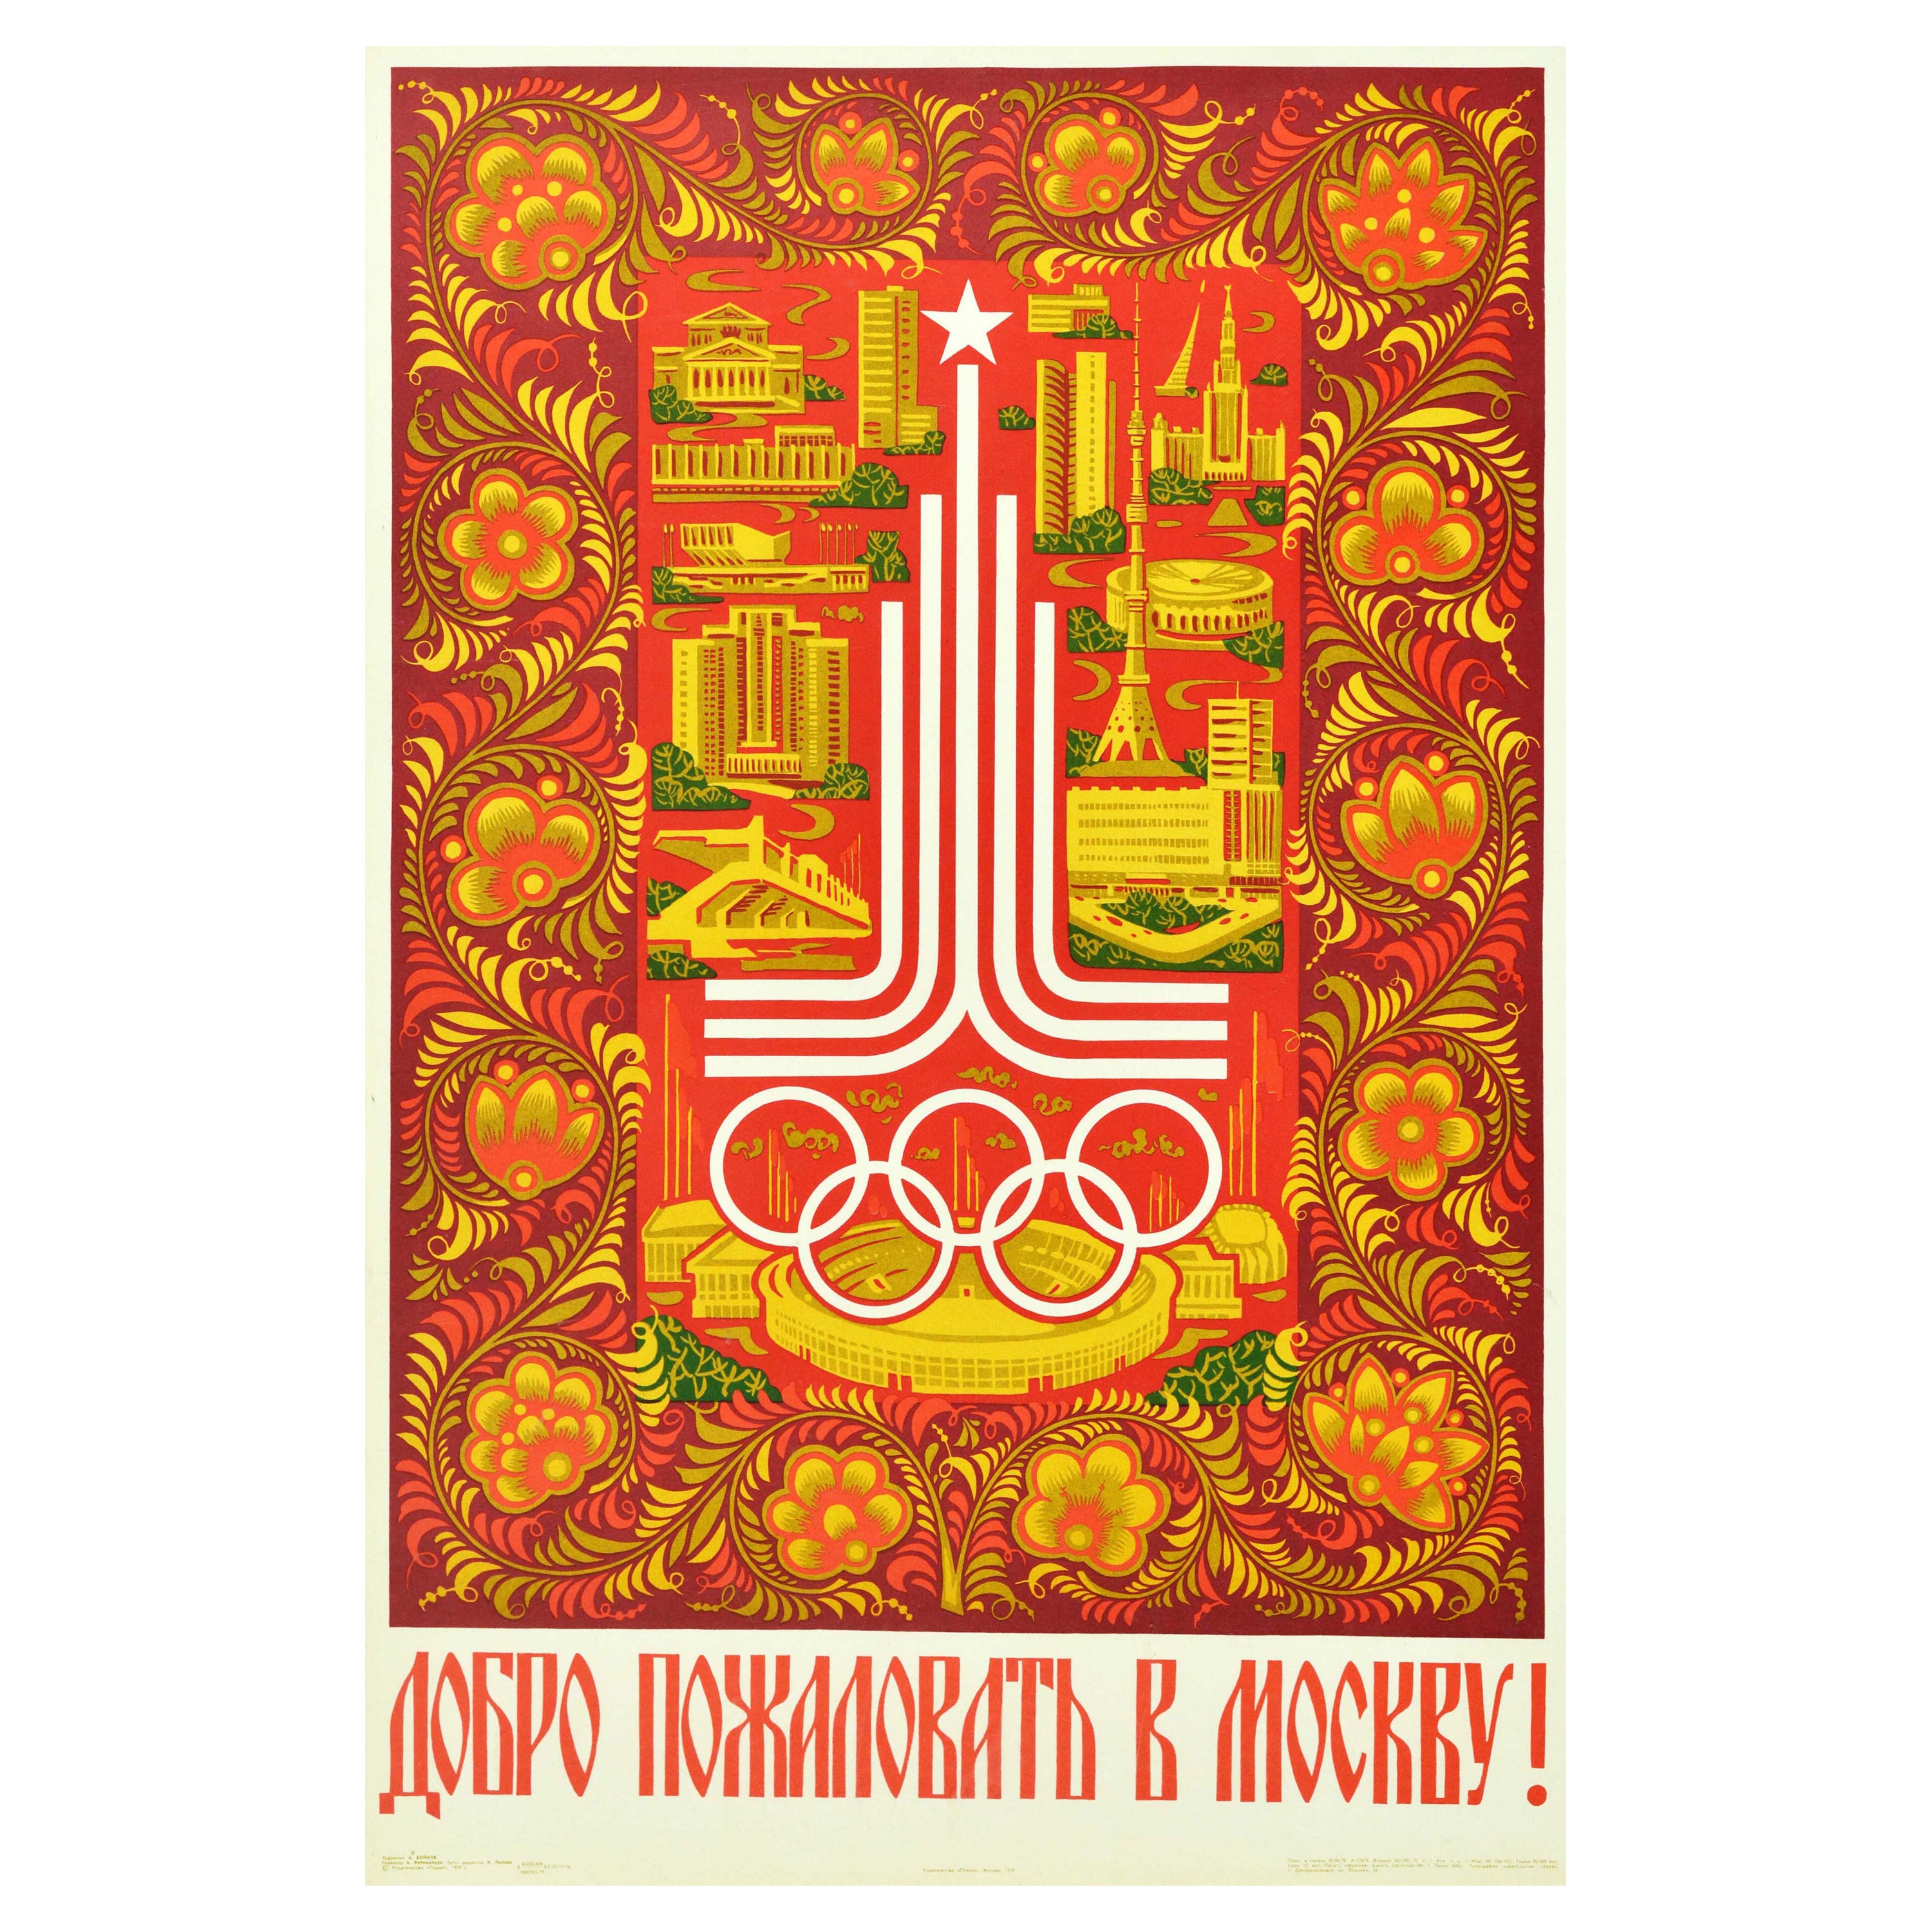 Original Vintage Olympic Games Poster Welcome To Moscow Sport Stadiums Khokhloma For Sale